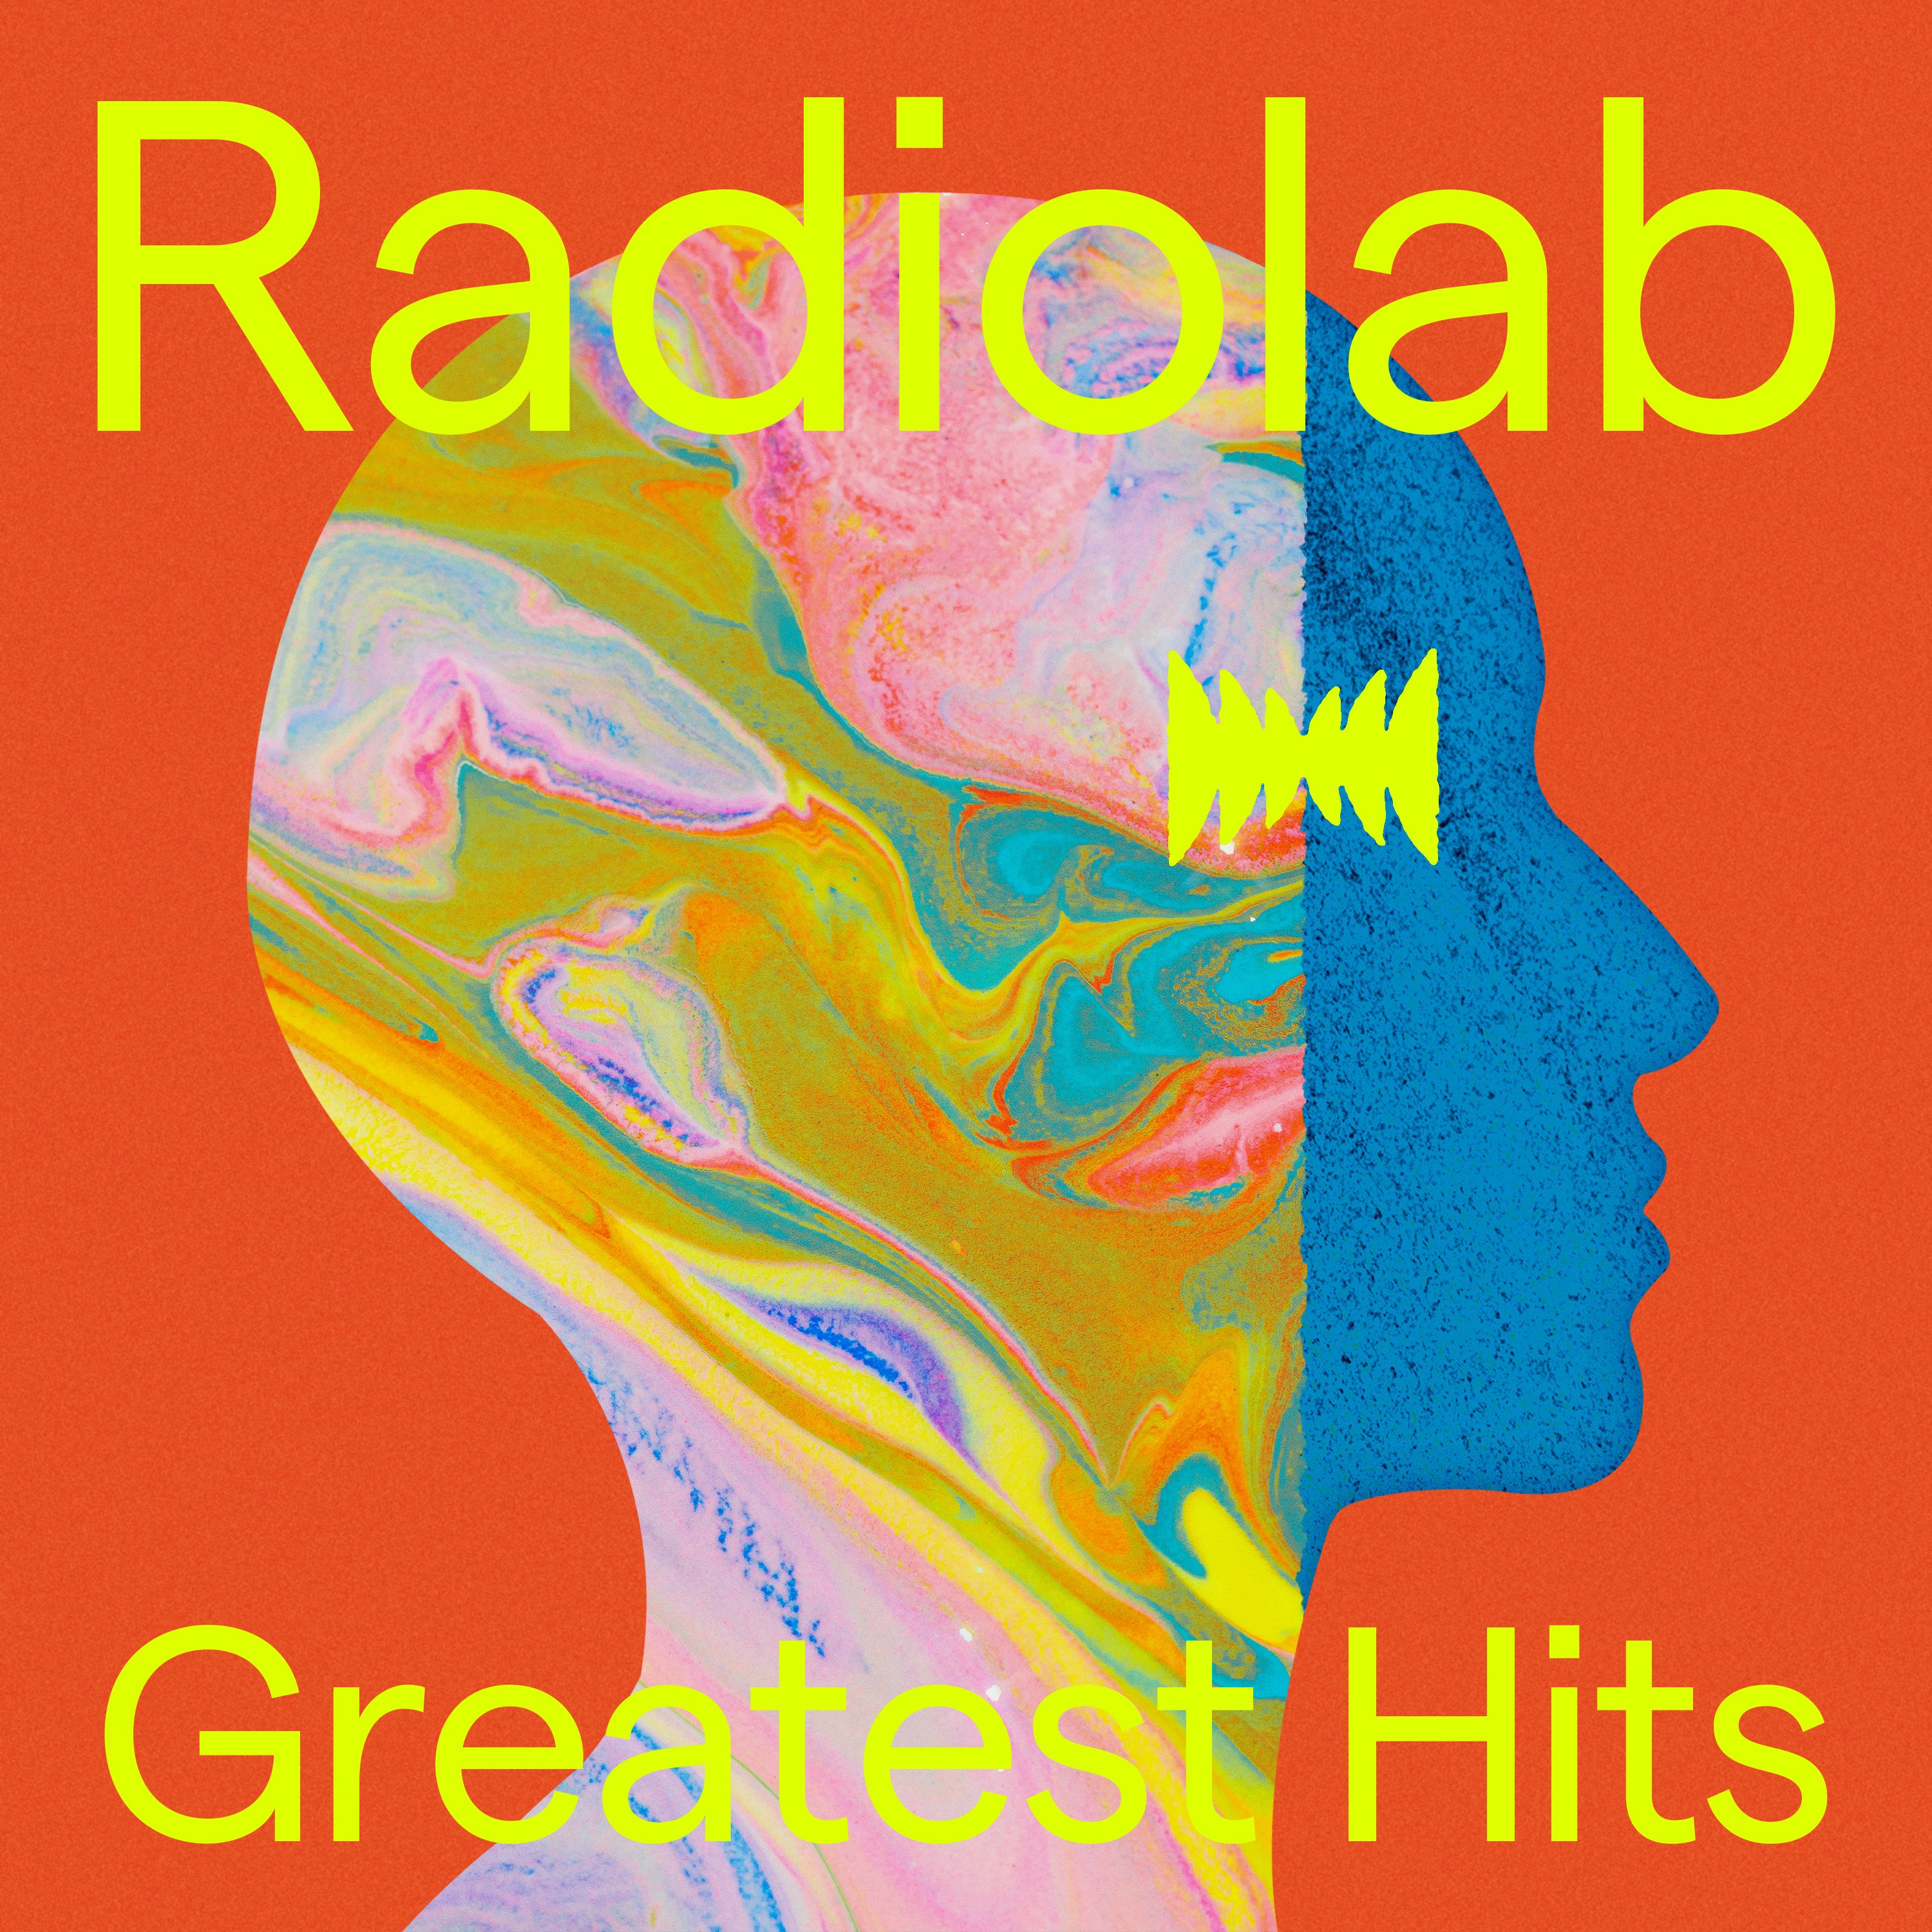 Radiolab: The Greatest Hits podcast tile